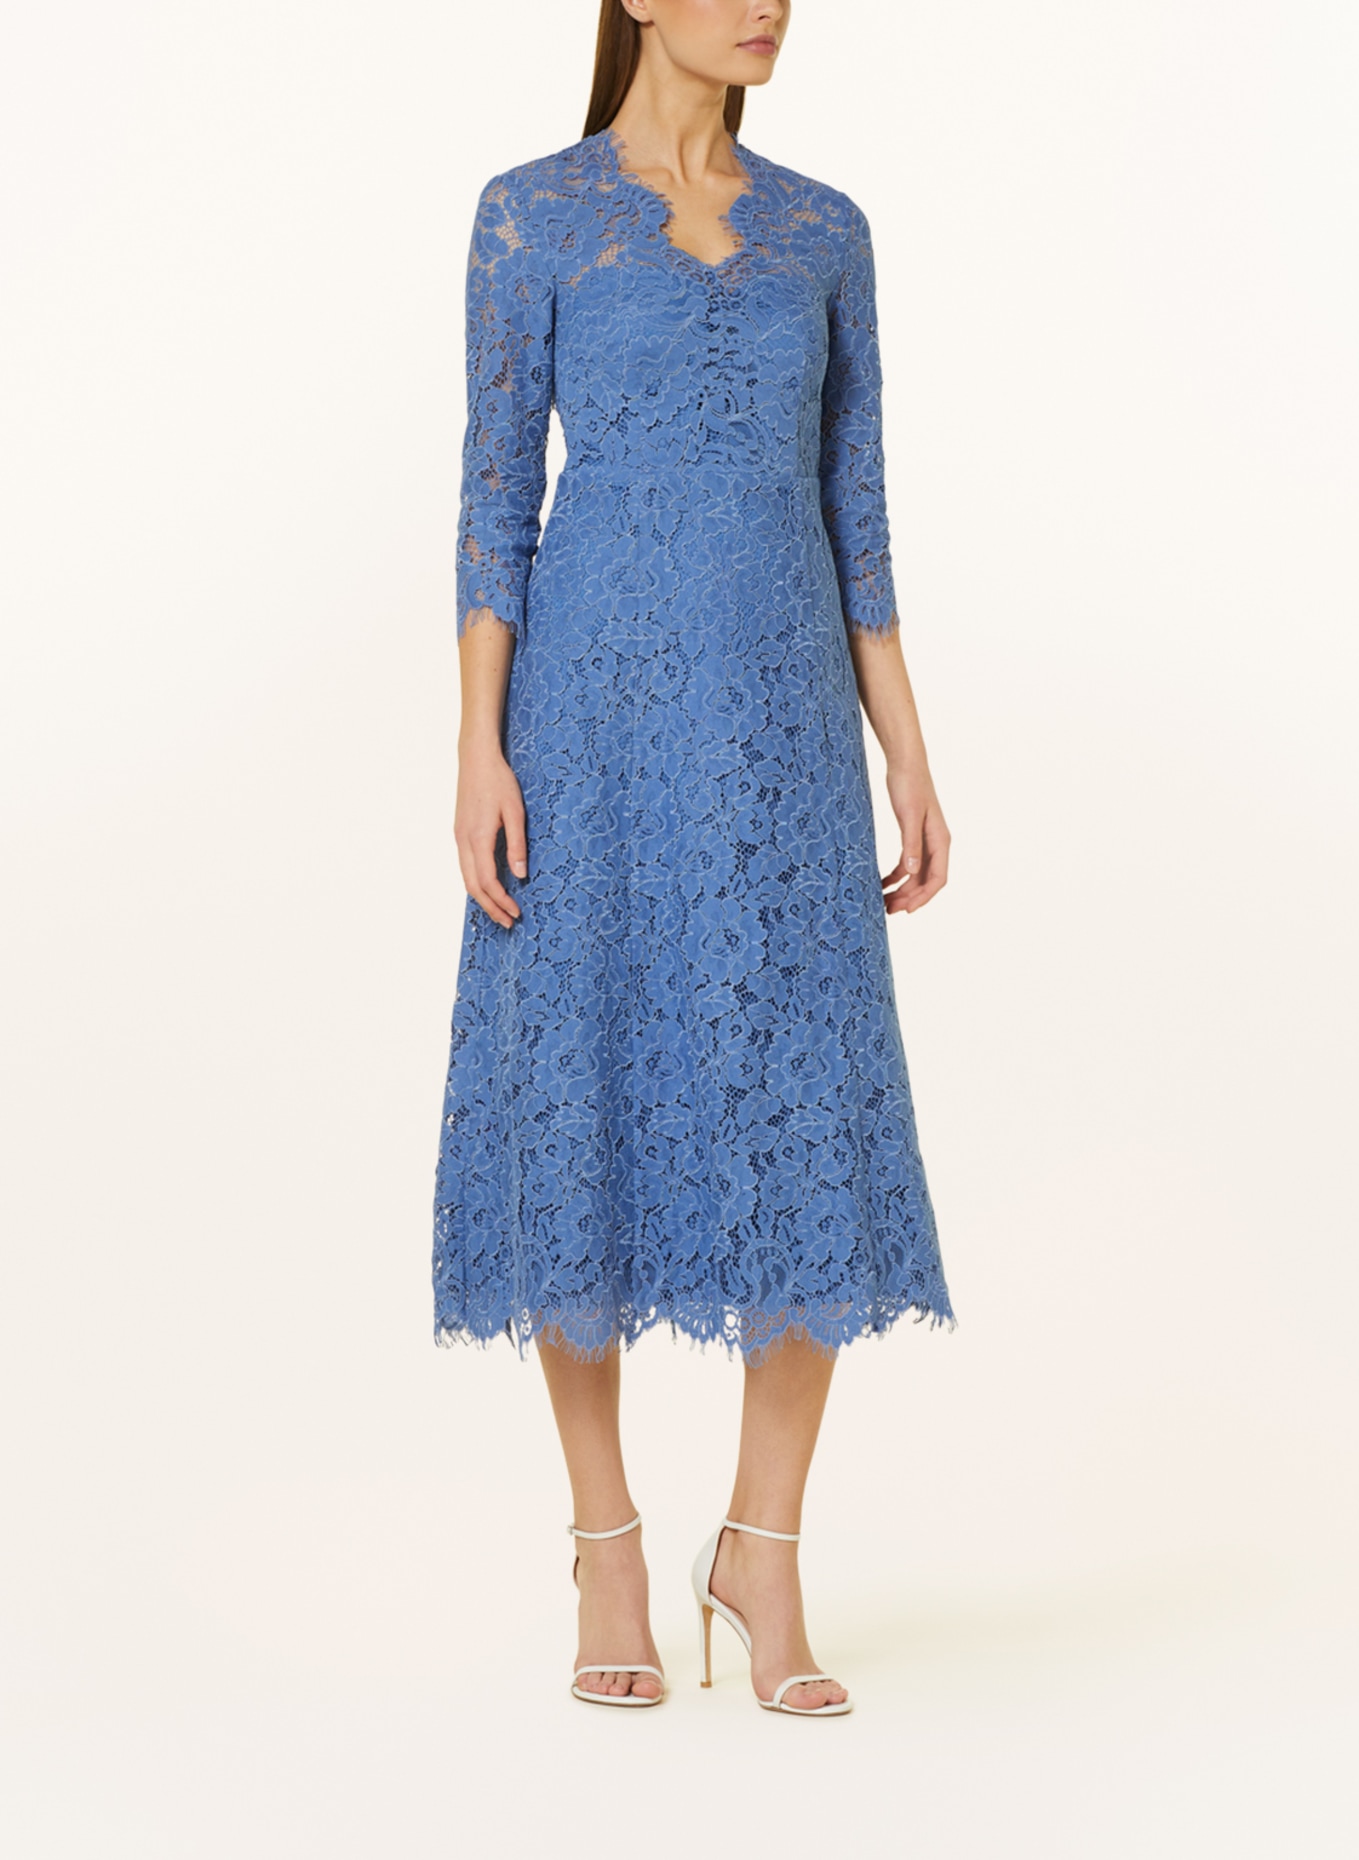 IVY OAK Cocktail dress MADELEINE in lace with cut-out, Color: BLUE (Image 2)